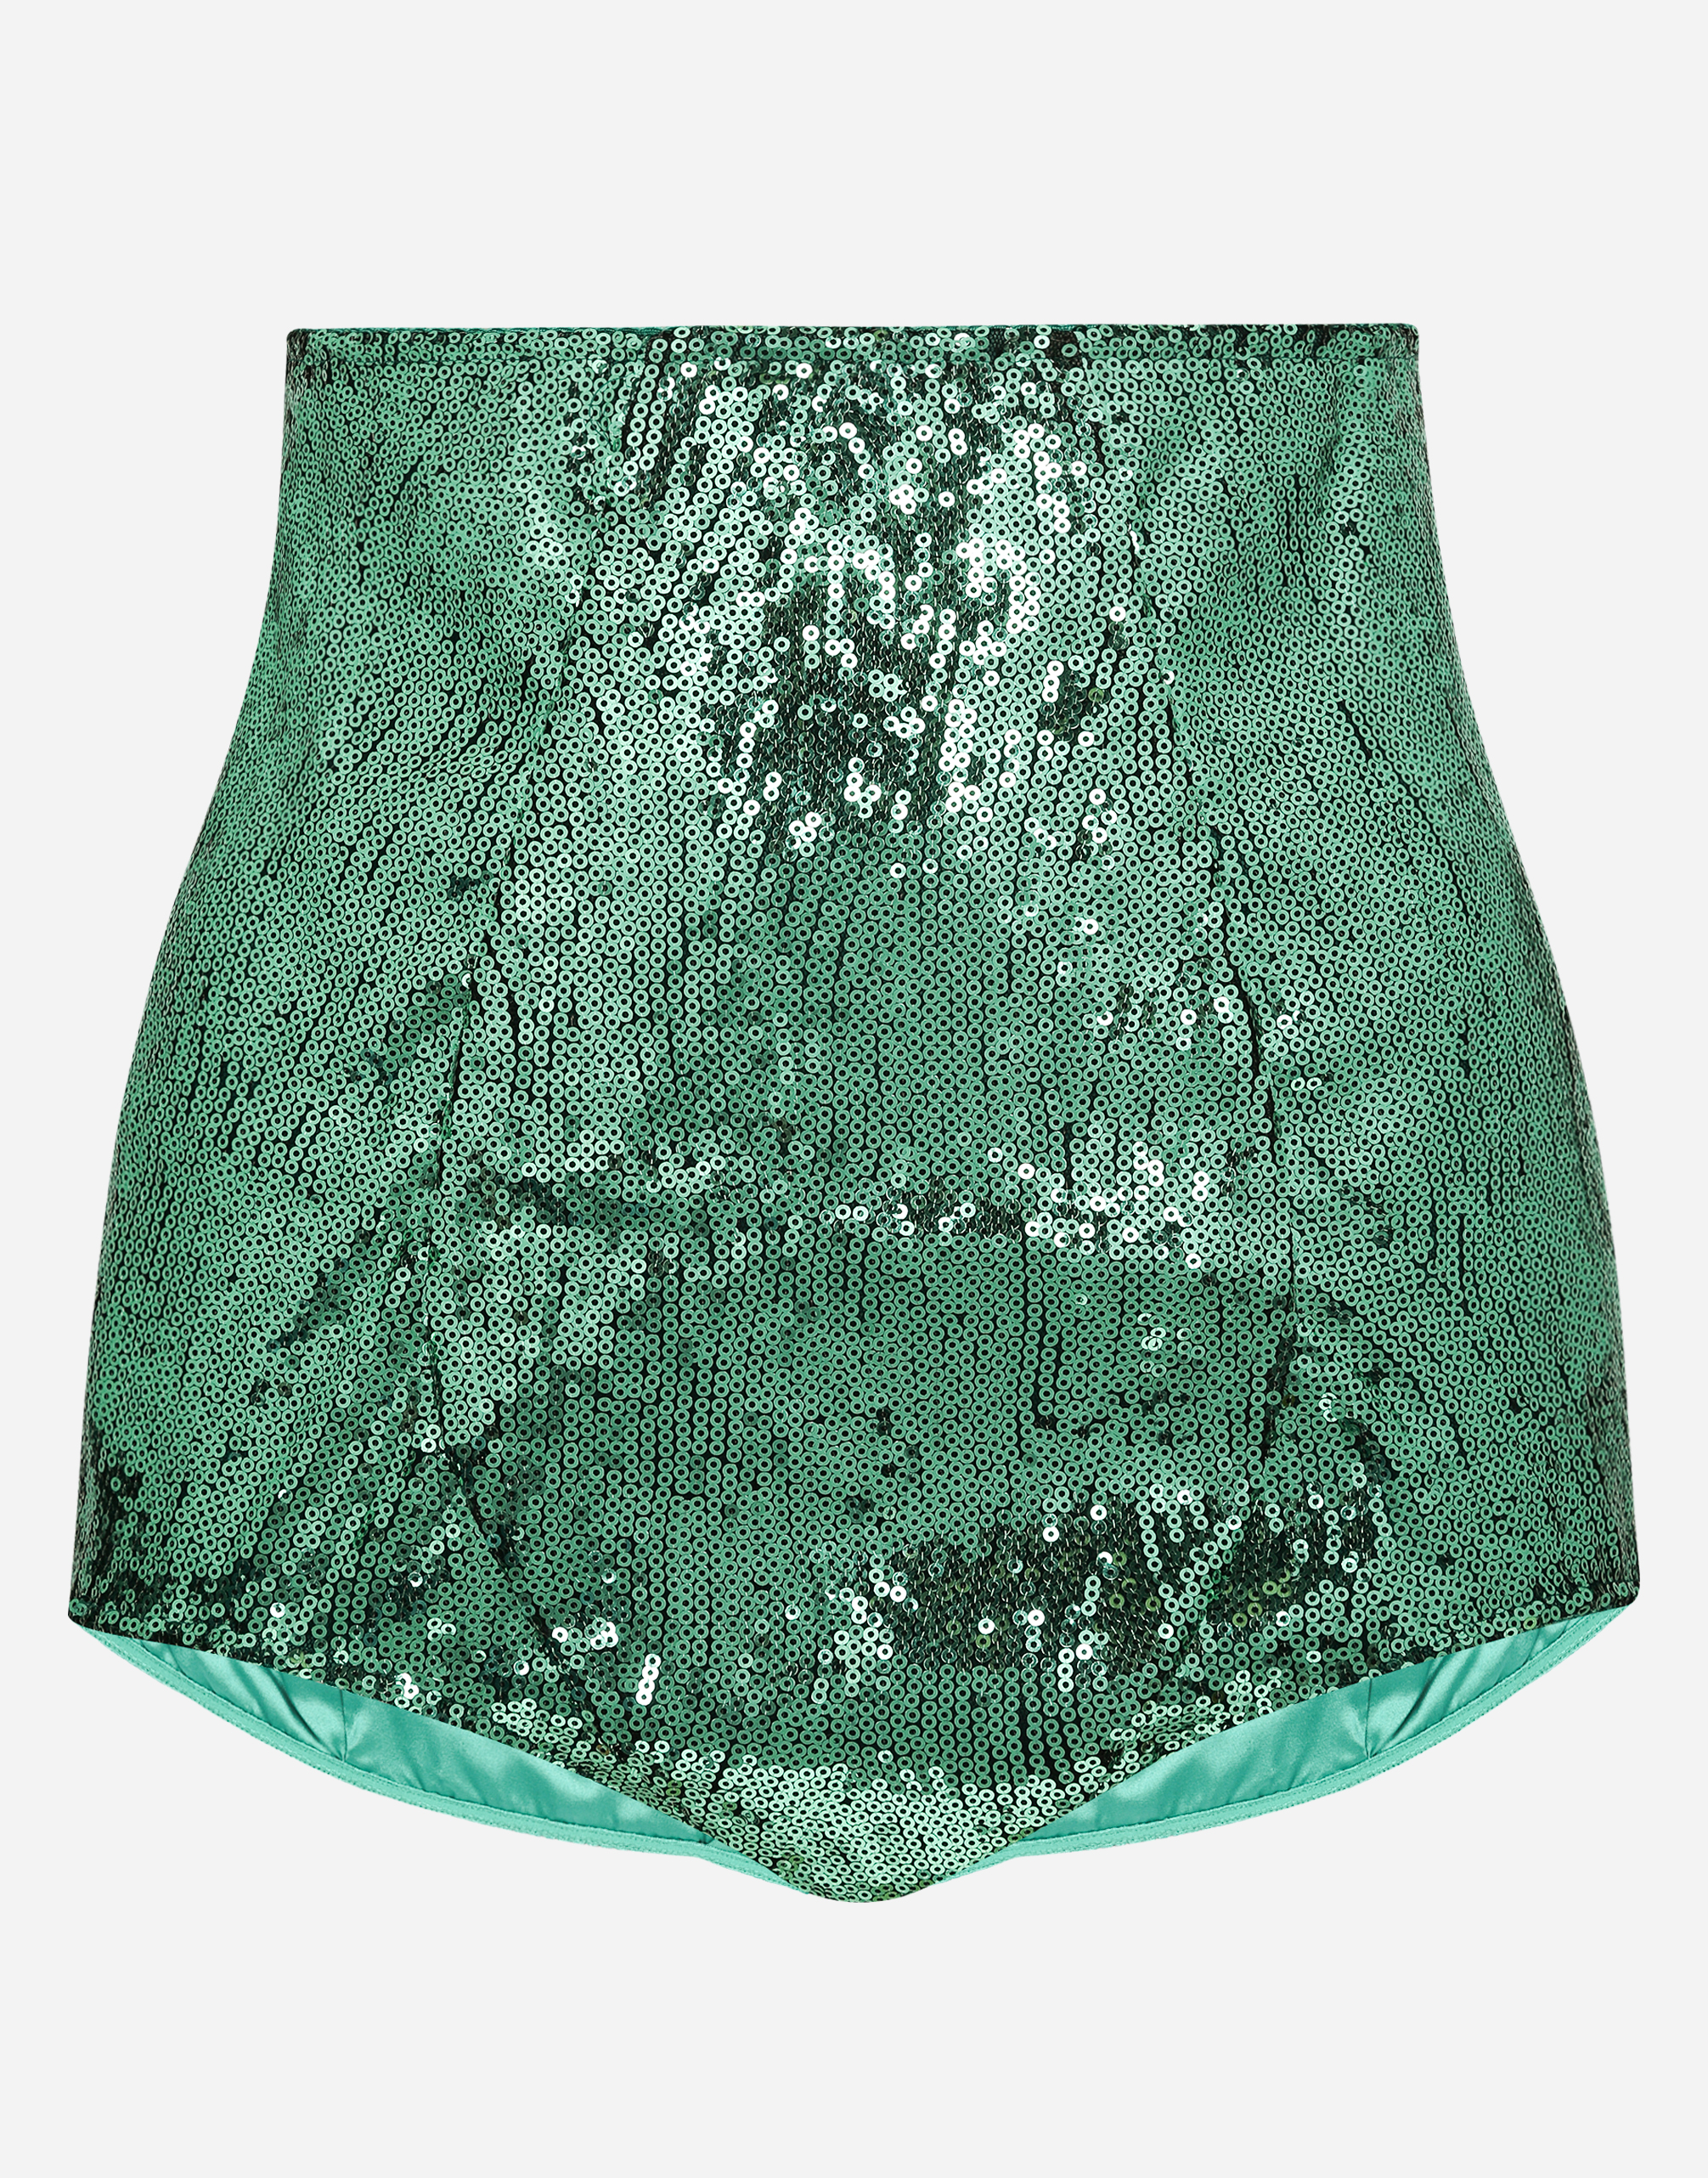 Sequined high-waisted panties in Green